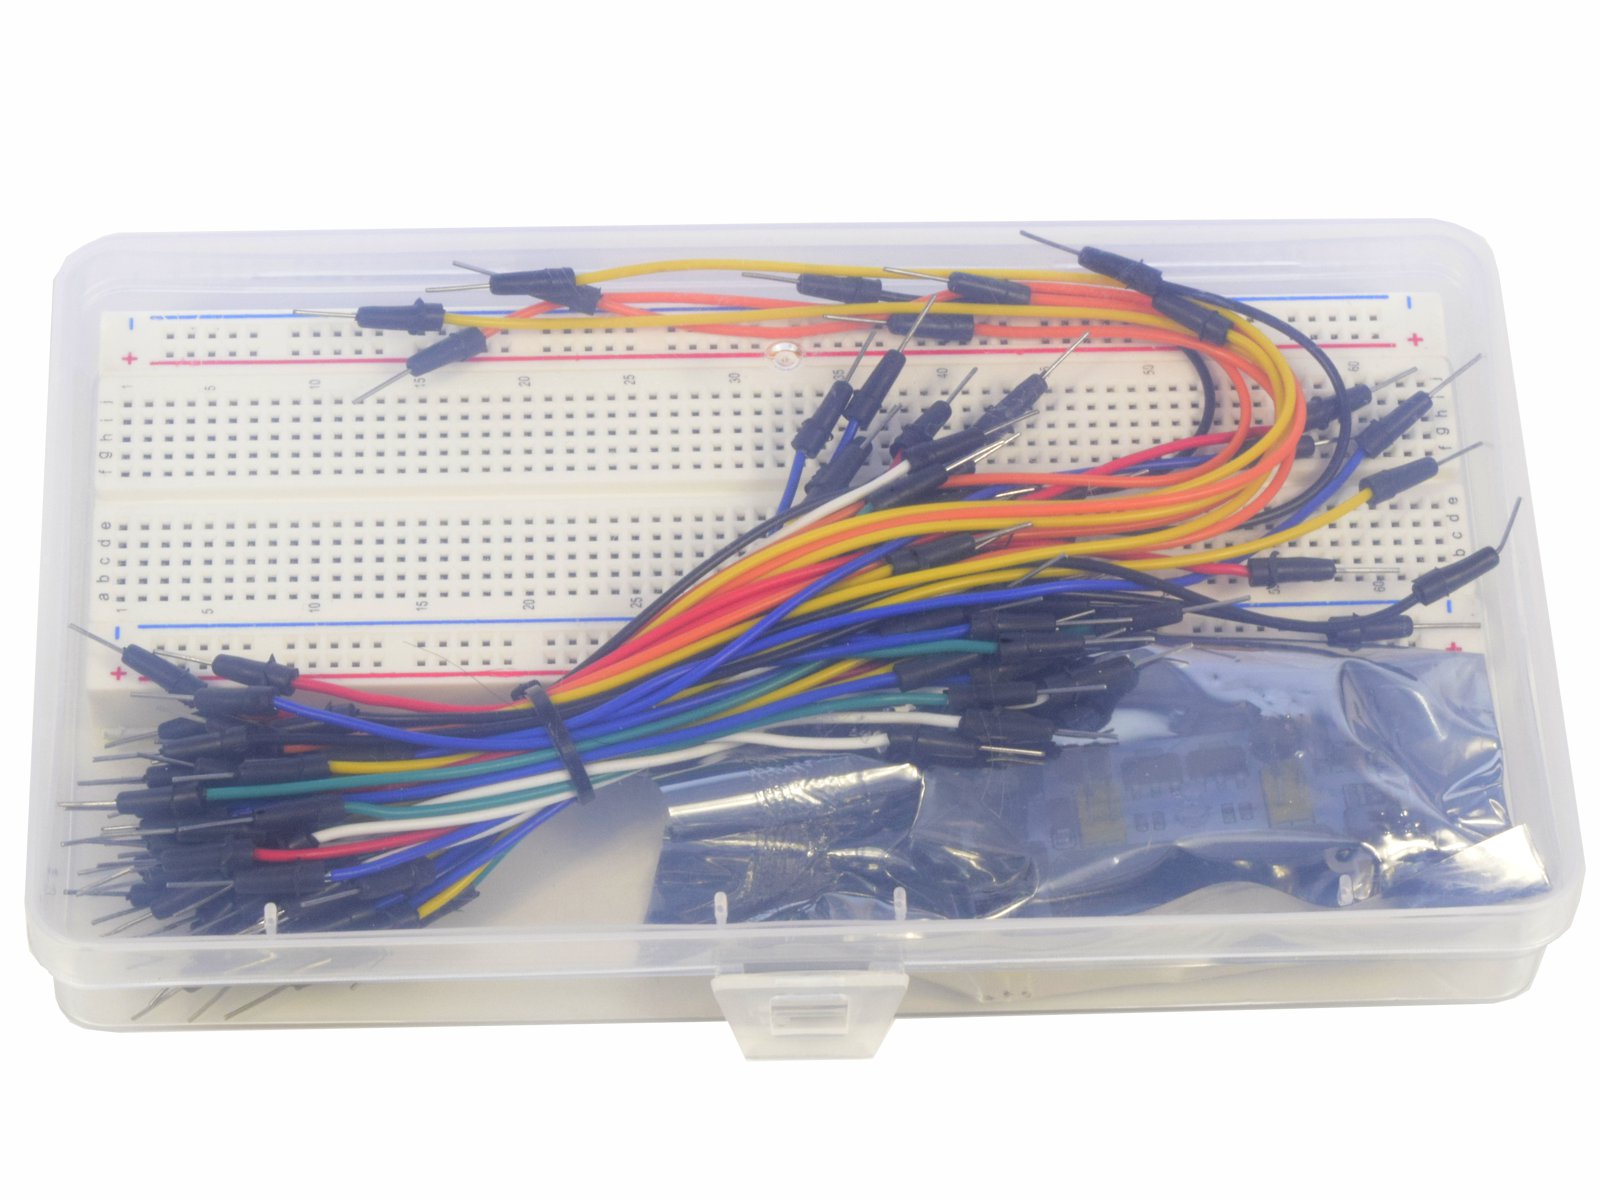 Breadboard 830 Starter Kit with wires and power supply 3